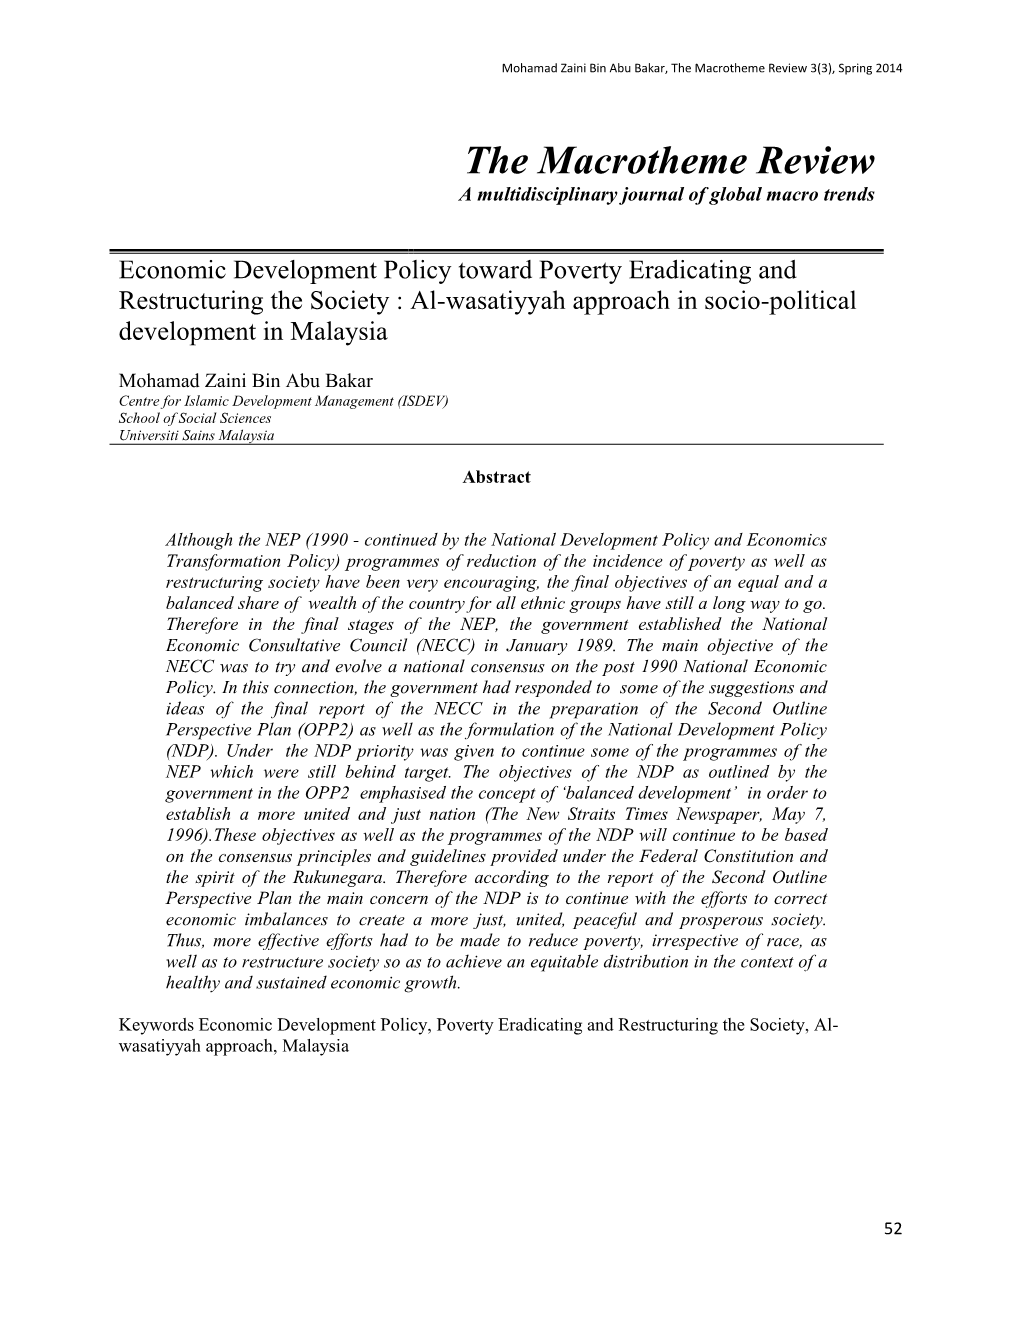 Economic Development Policy Toward Poverty Eradicating and Restructuring the Society : Al-Wasatiyyah Approach in Socio-Political Development in Malaysia